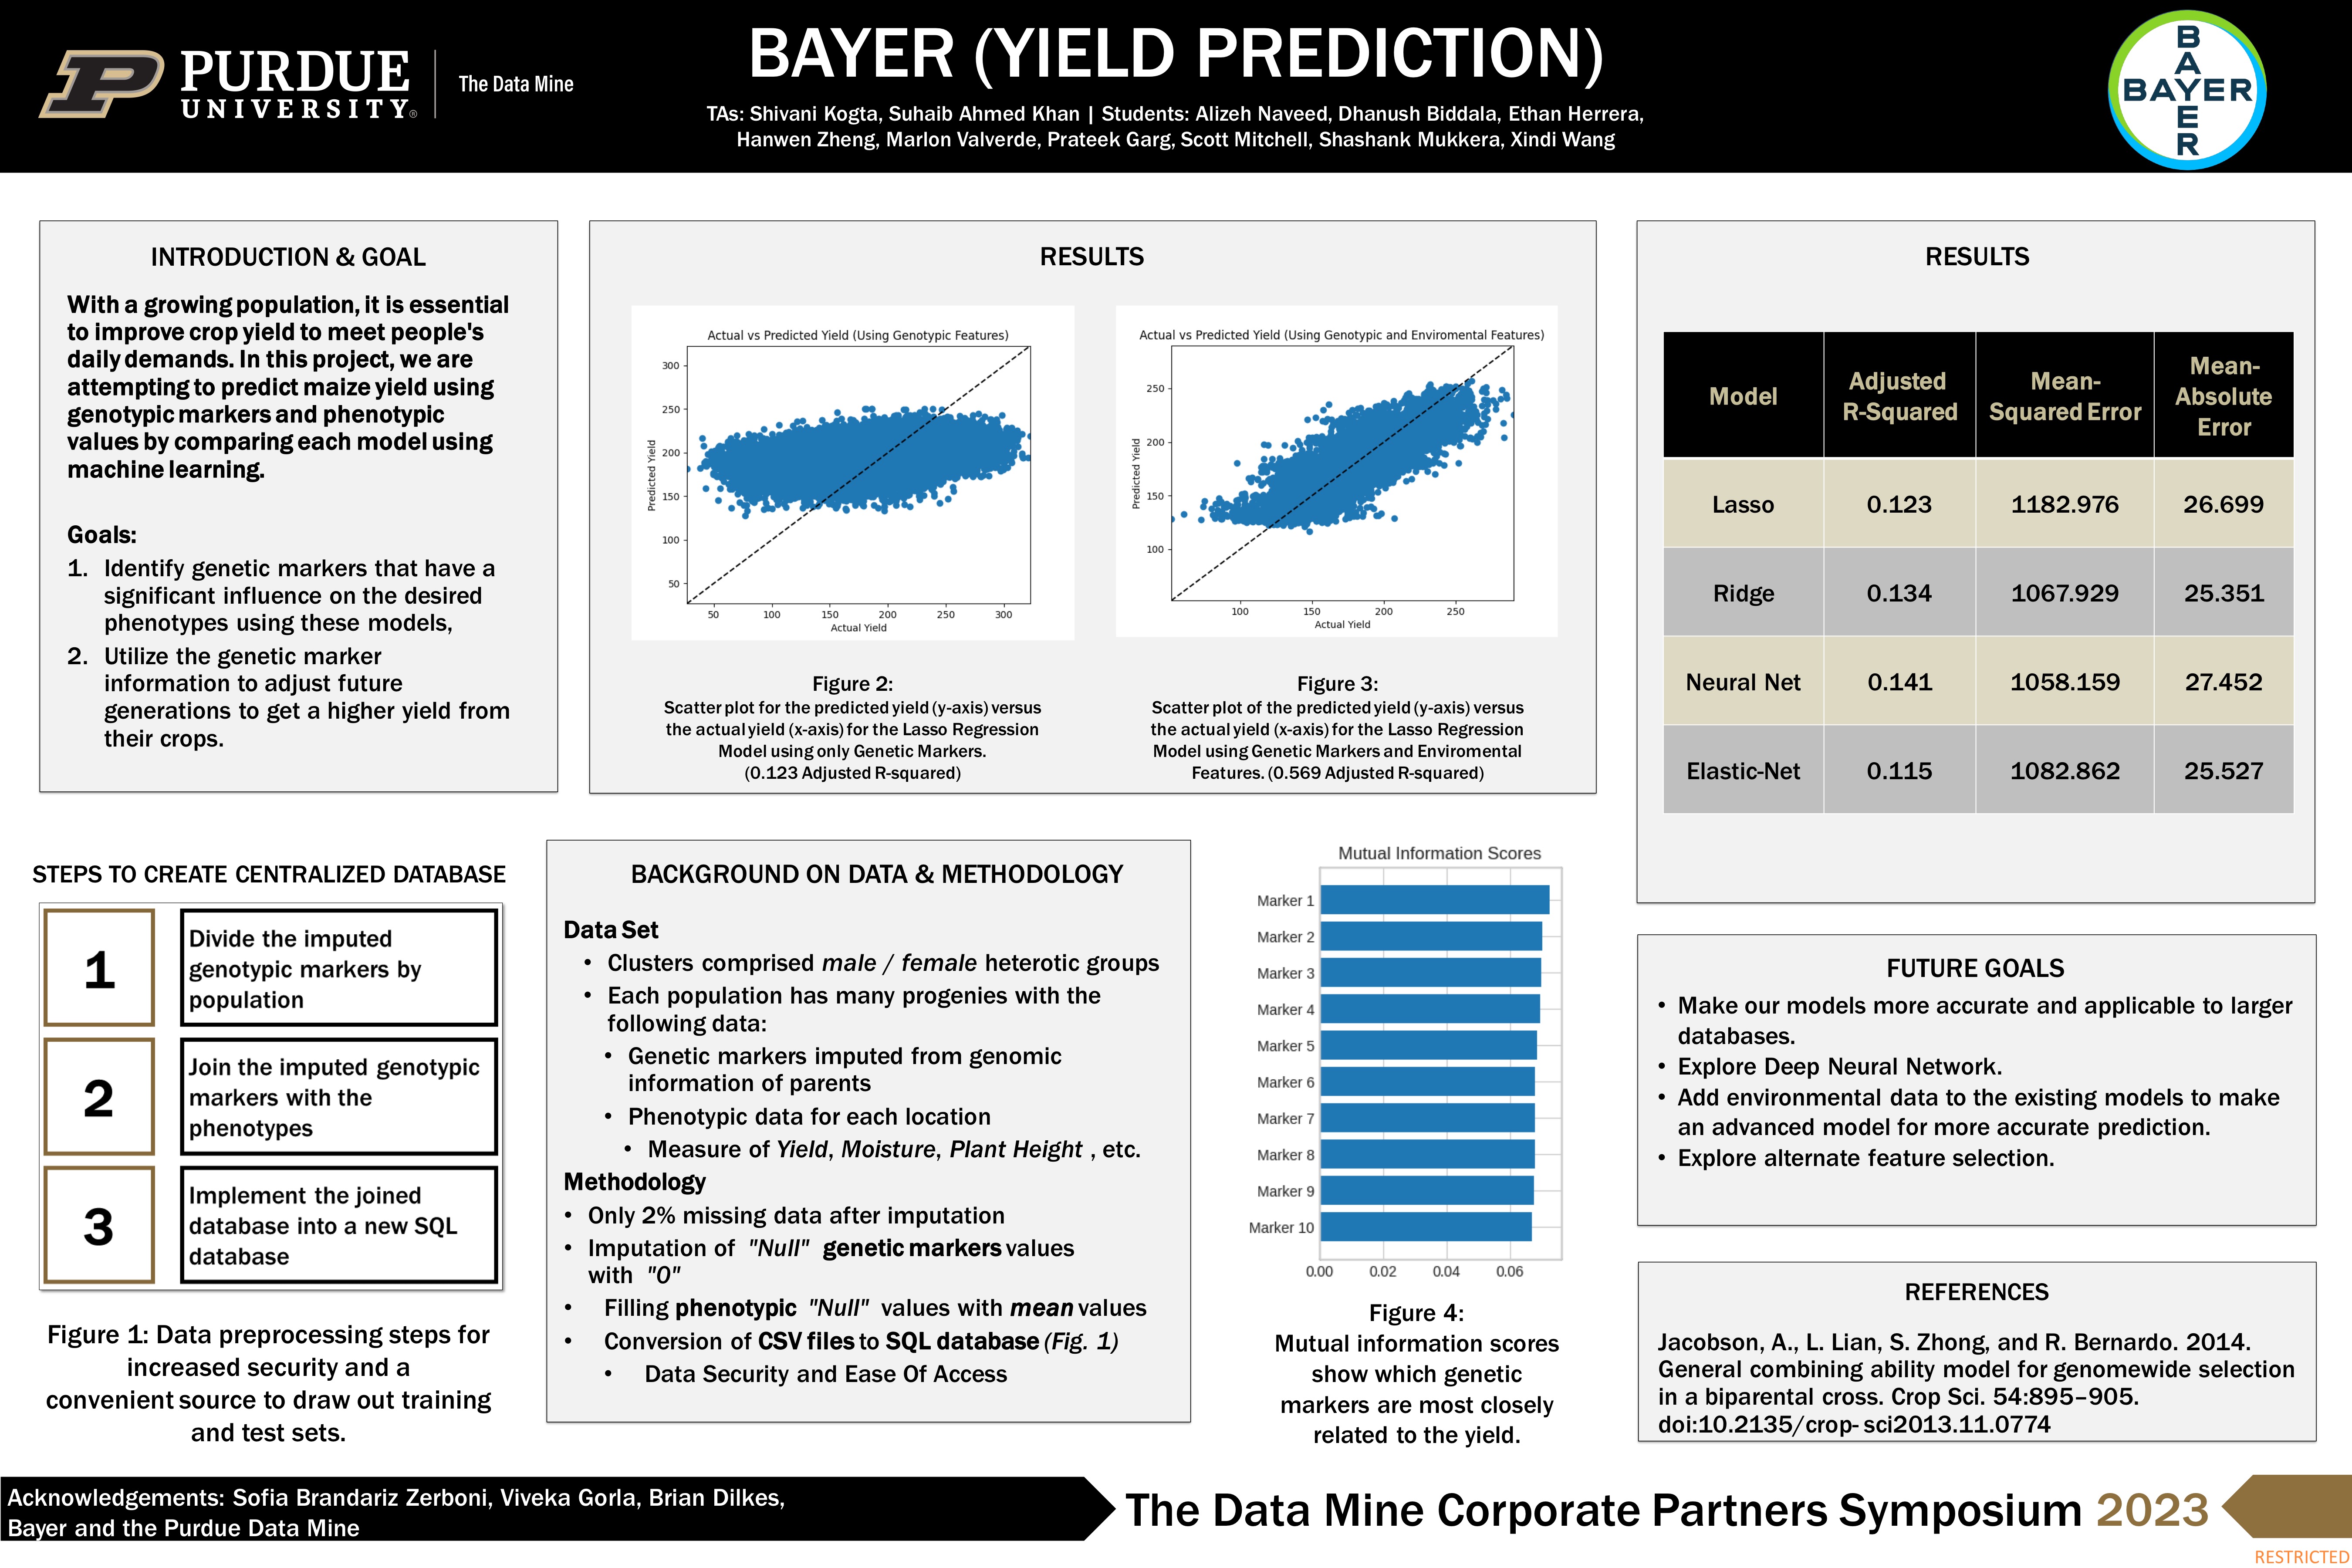 TDM 2023 Bayer - Yield Predicition Poster